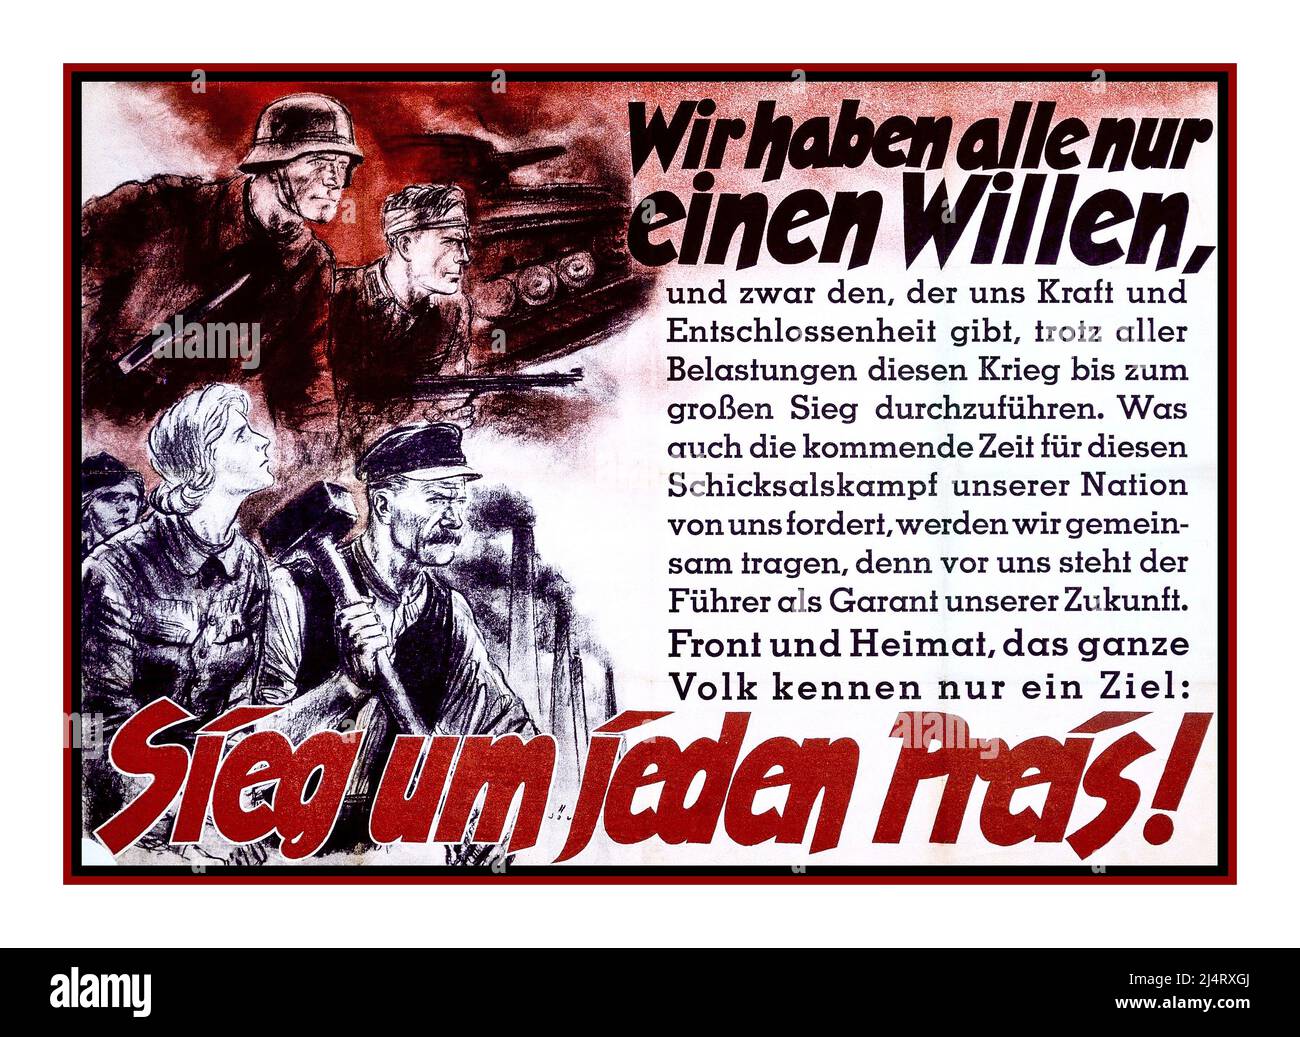 Volkssturm WW2 Nazi Germany Propaganda Poster 'Wir haben alle nur einen Willen'  'We all have only one will'. 'Sieg um jeden Preis'  'Winning at any cost' 'people only know one goal'  The Volkssturm was a levée en masse national militia peoples army established by Nazi Germany during the last months of World War II. It was not set up by the German Army, the ground component of the combined German Wehrmacht armed forces, but by the Nazi Party on the orders of Adolf Hitler and established on 25 September 1944 Stock Photo